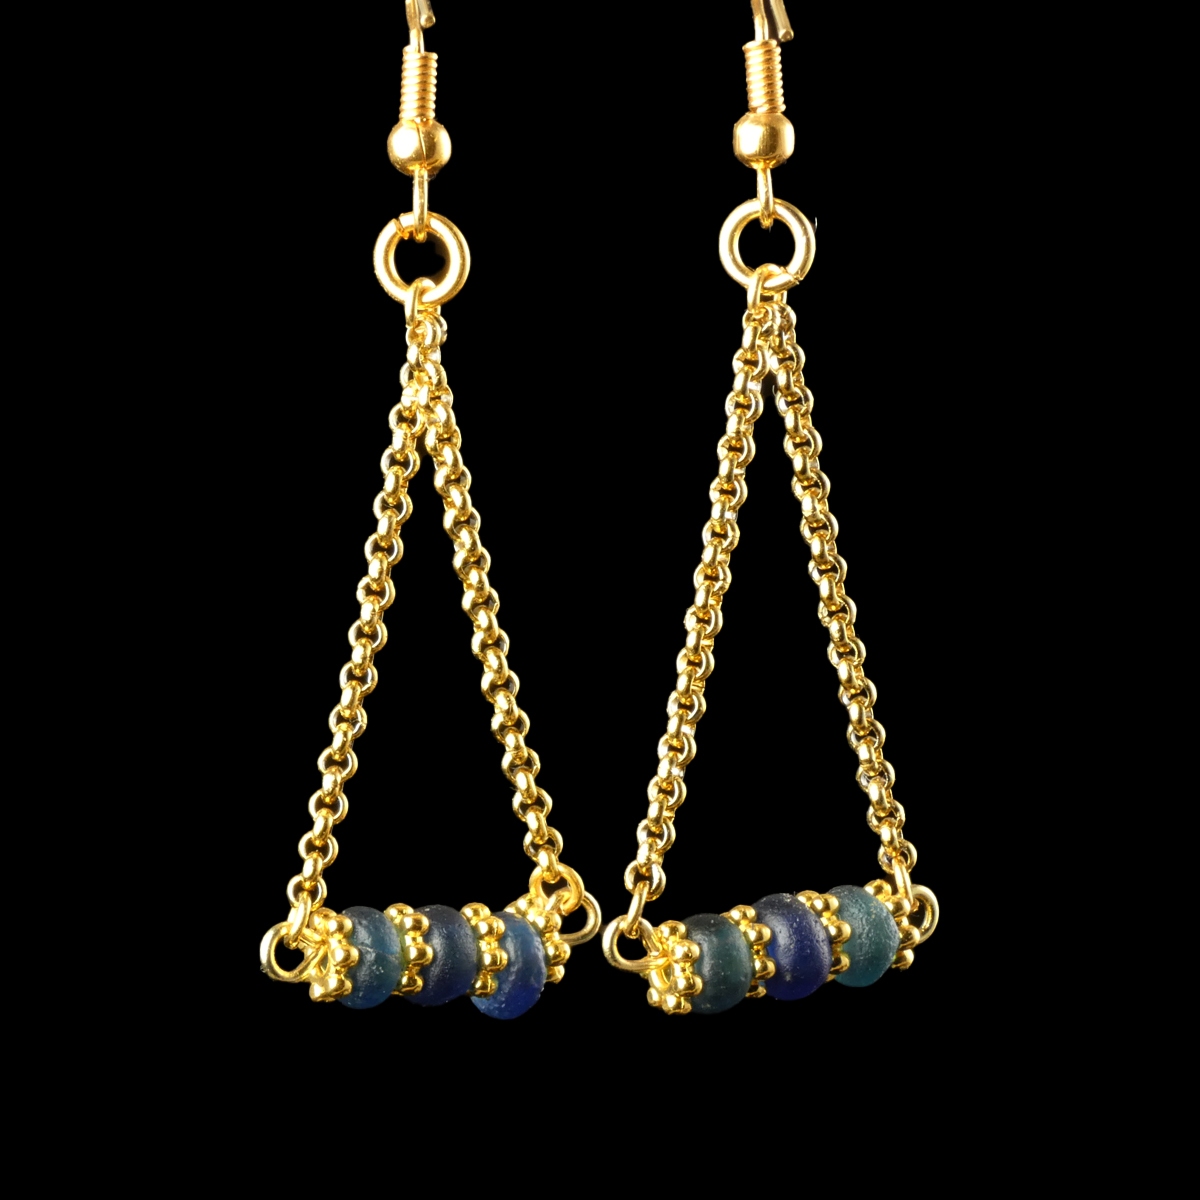 Earrings with Roman blue glass beads